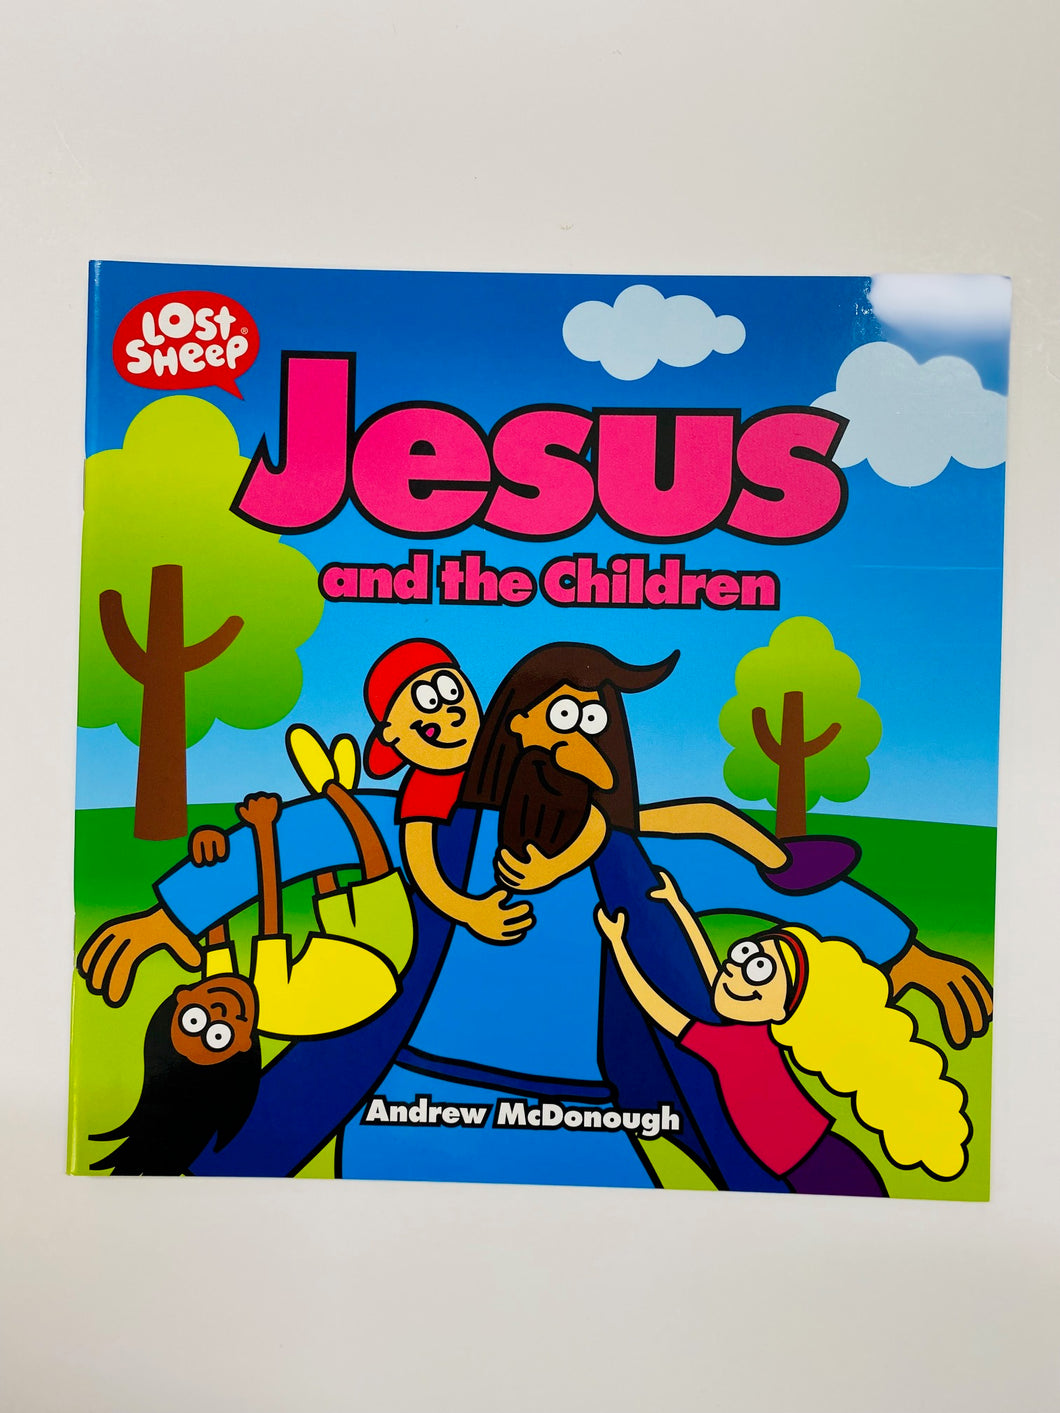 Lost Sheep: Jesus and the Children